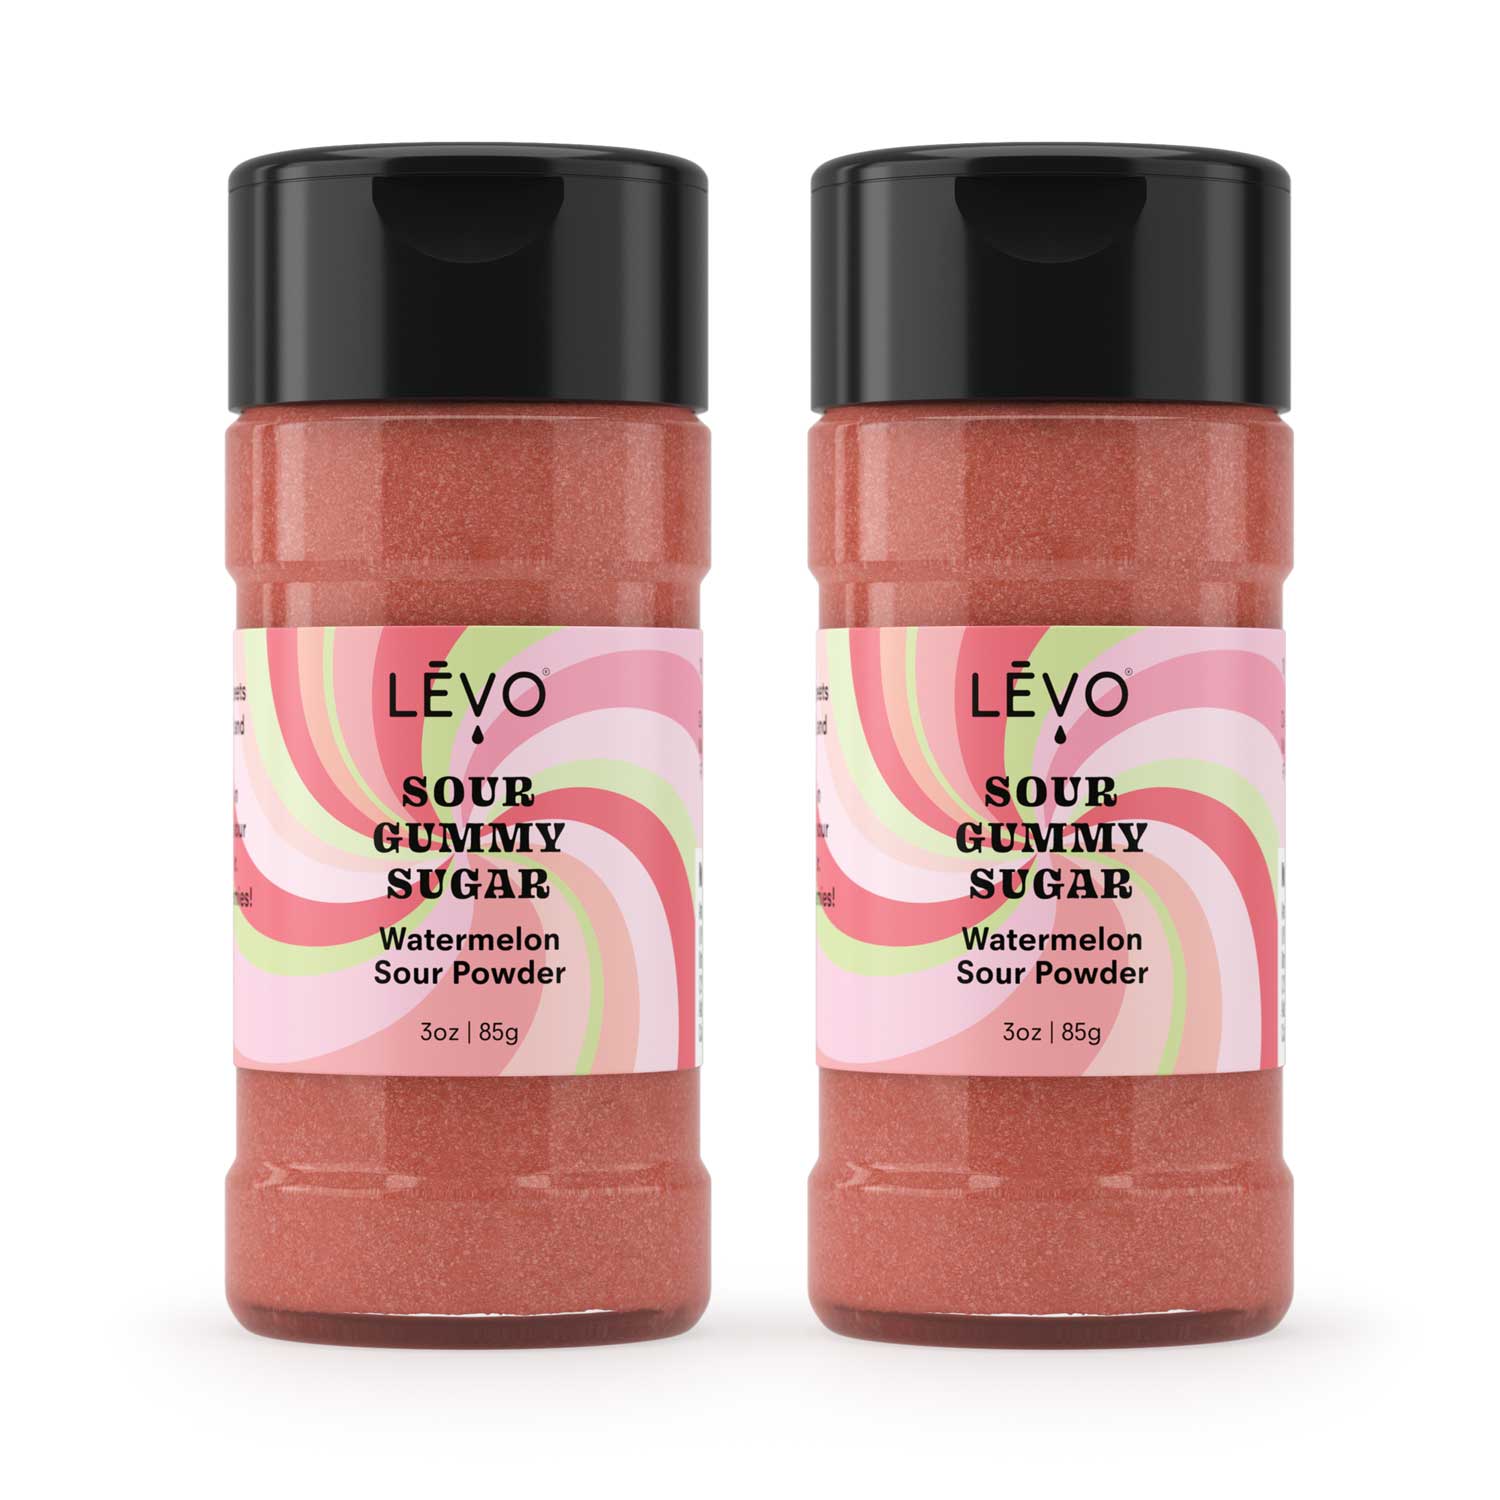 Infuse your gummies and then dust them with LEVO Watermelon sour powder finishing sugar